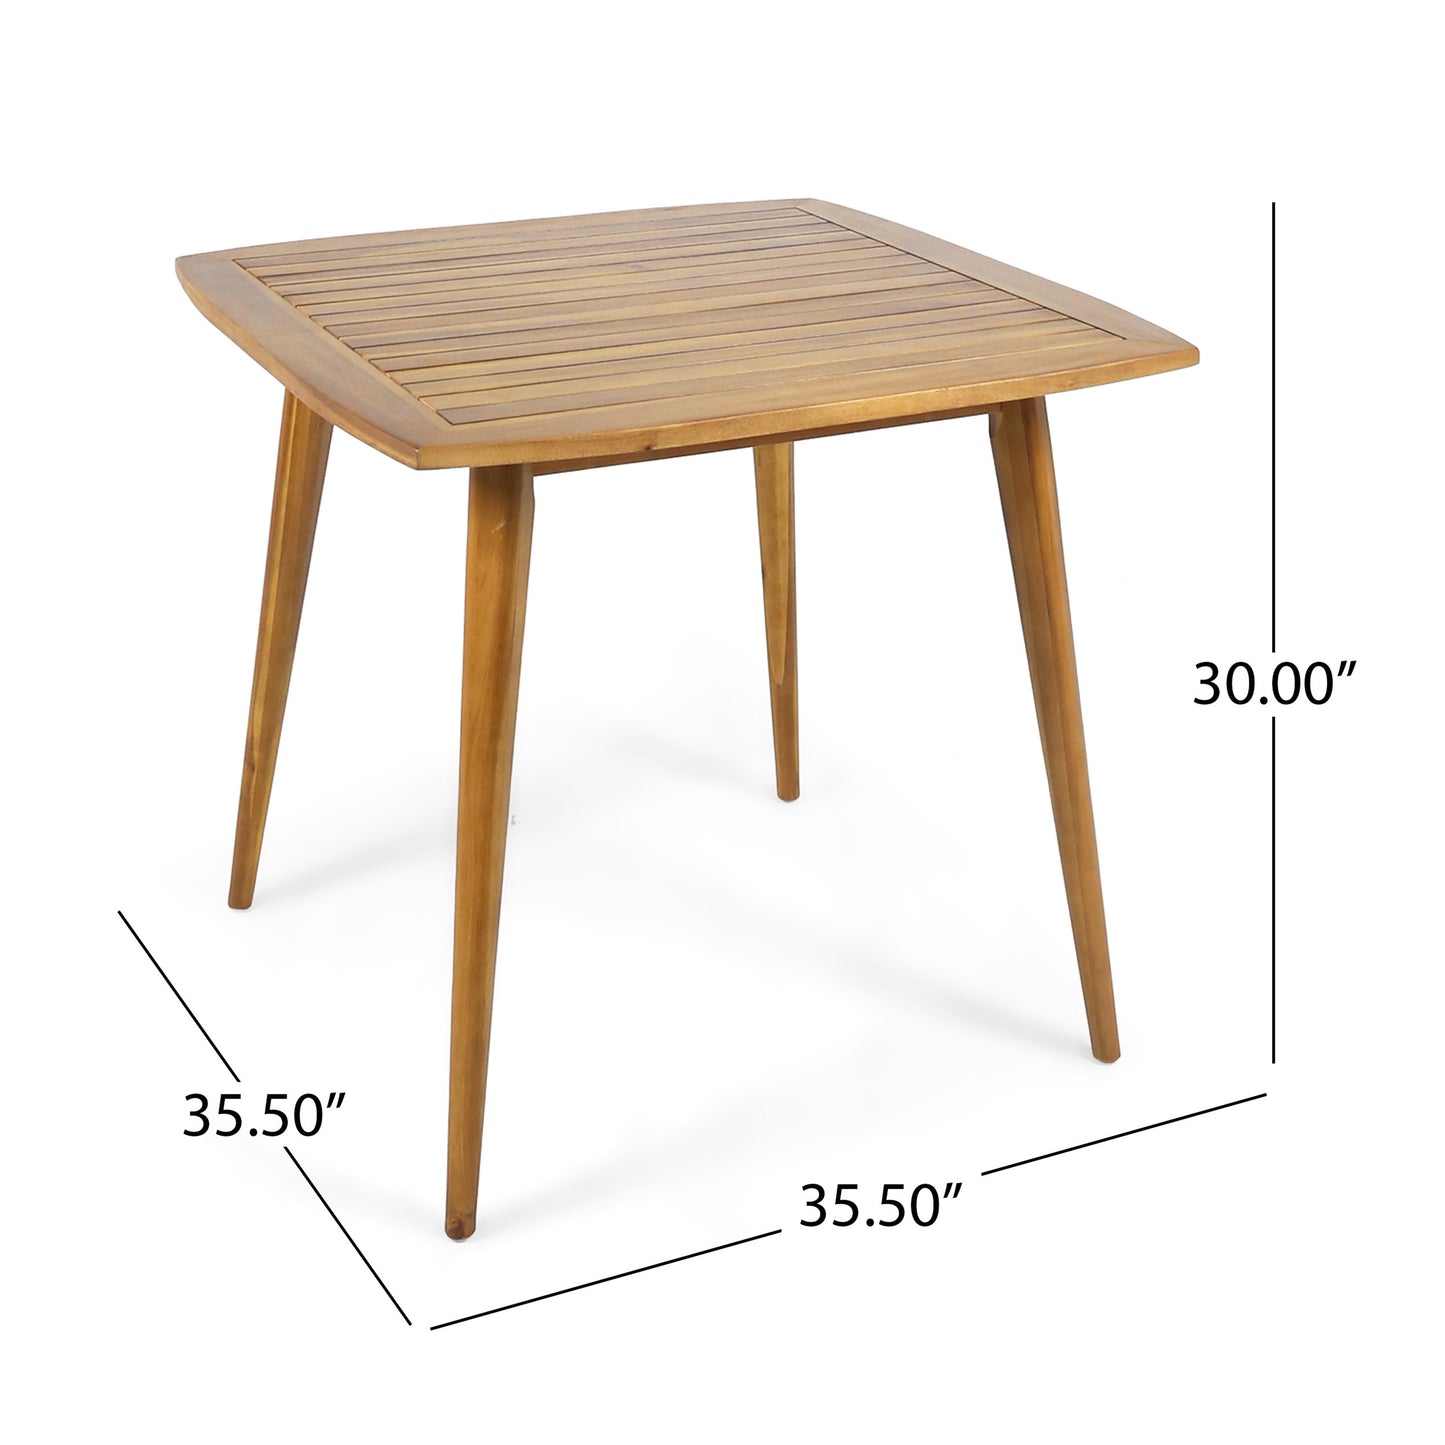 Stanford Outdoor Square Acacia Wood Dining Table with Straight Legs